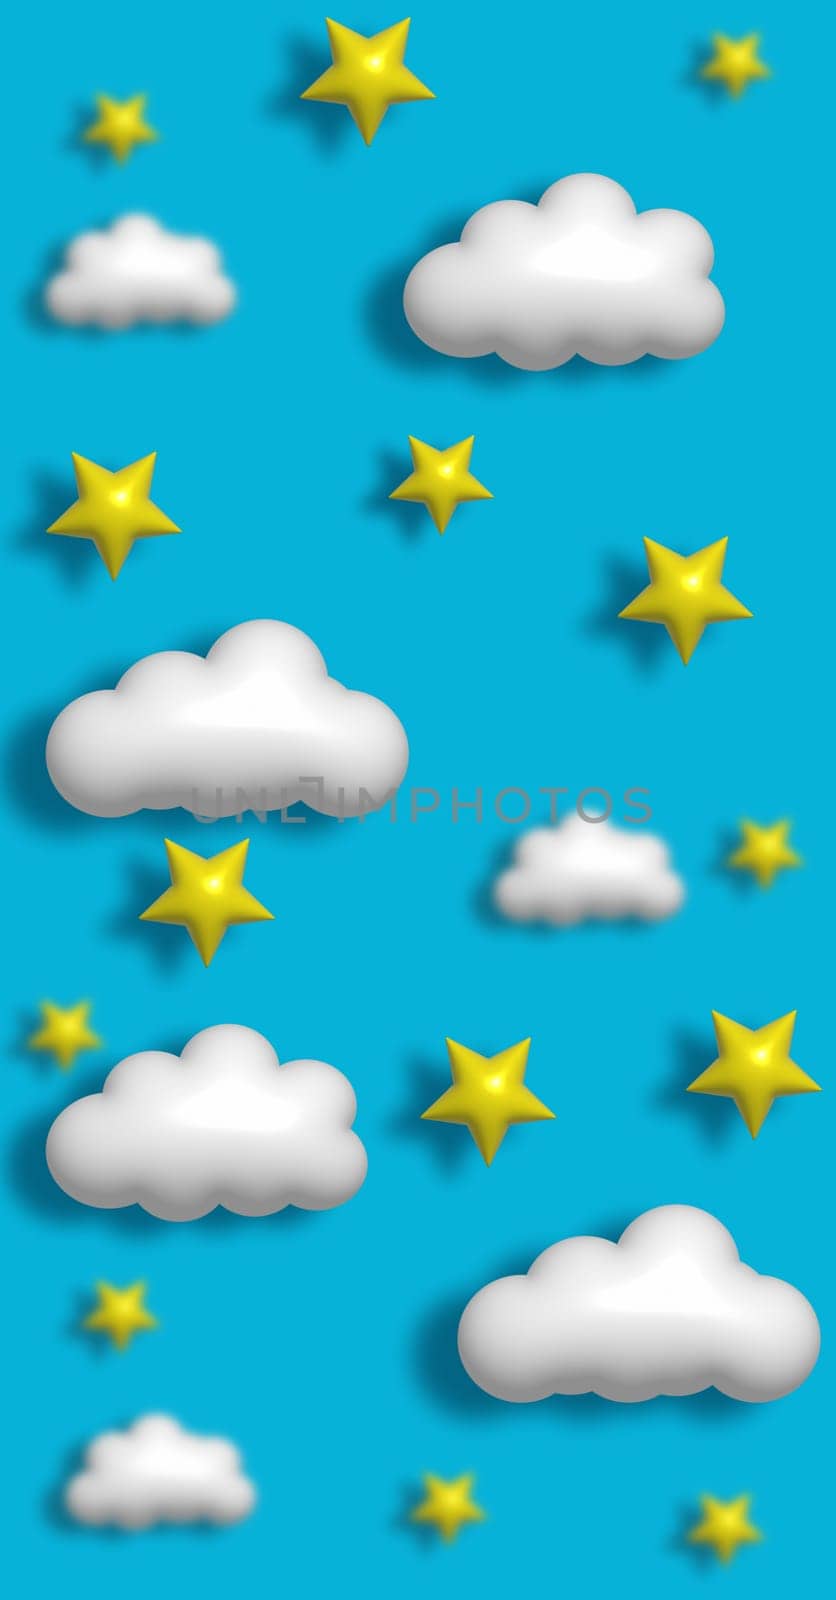 Abstract blue background with white puffy clouds and stars, 3D rendering illustration by ndanko